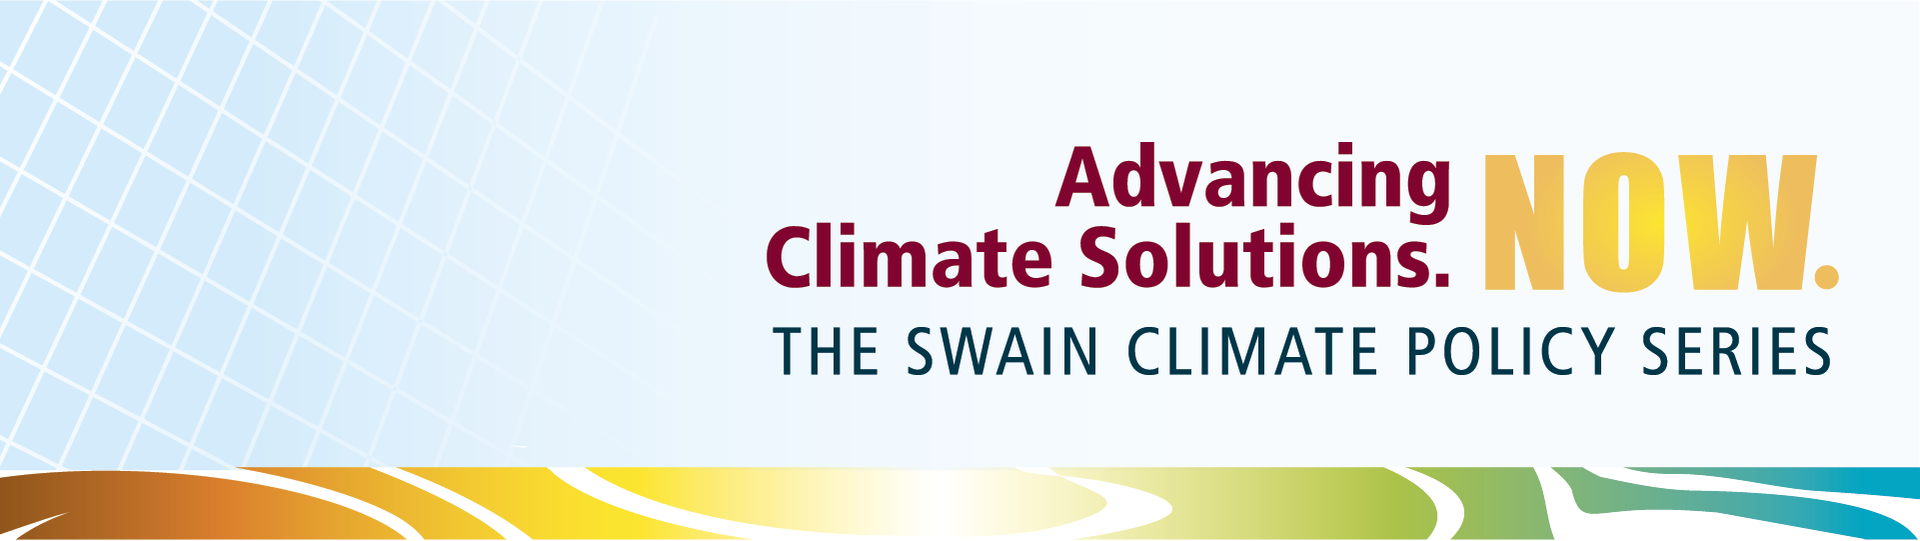 Advancing Climate Solutions. Now. The Swain Climate Policy Series